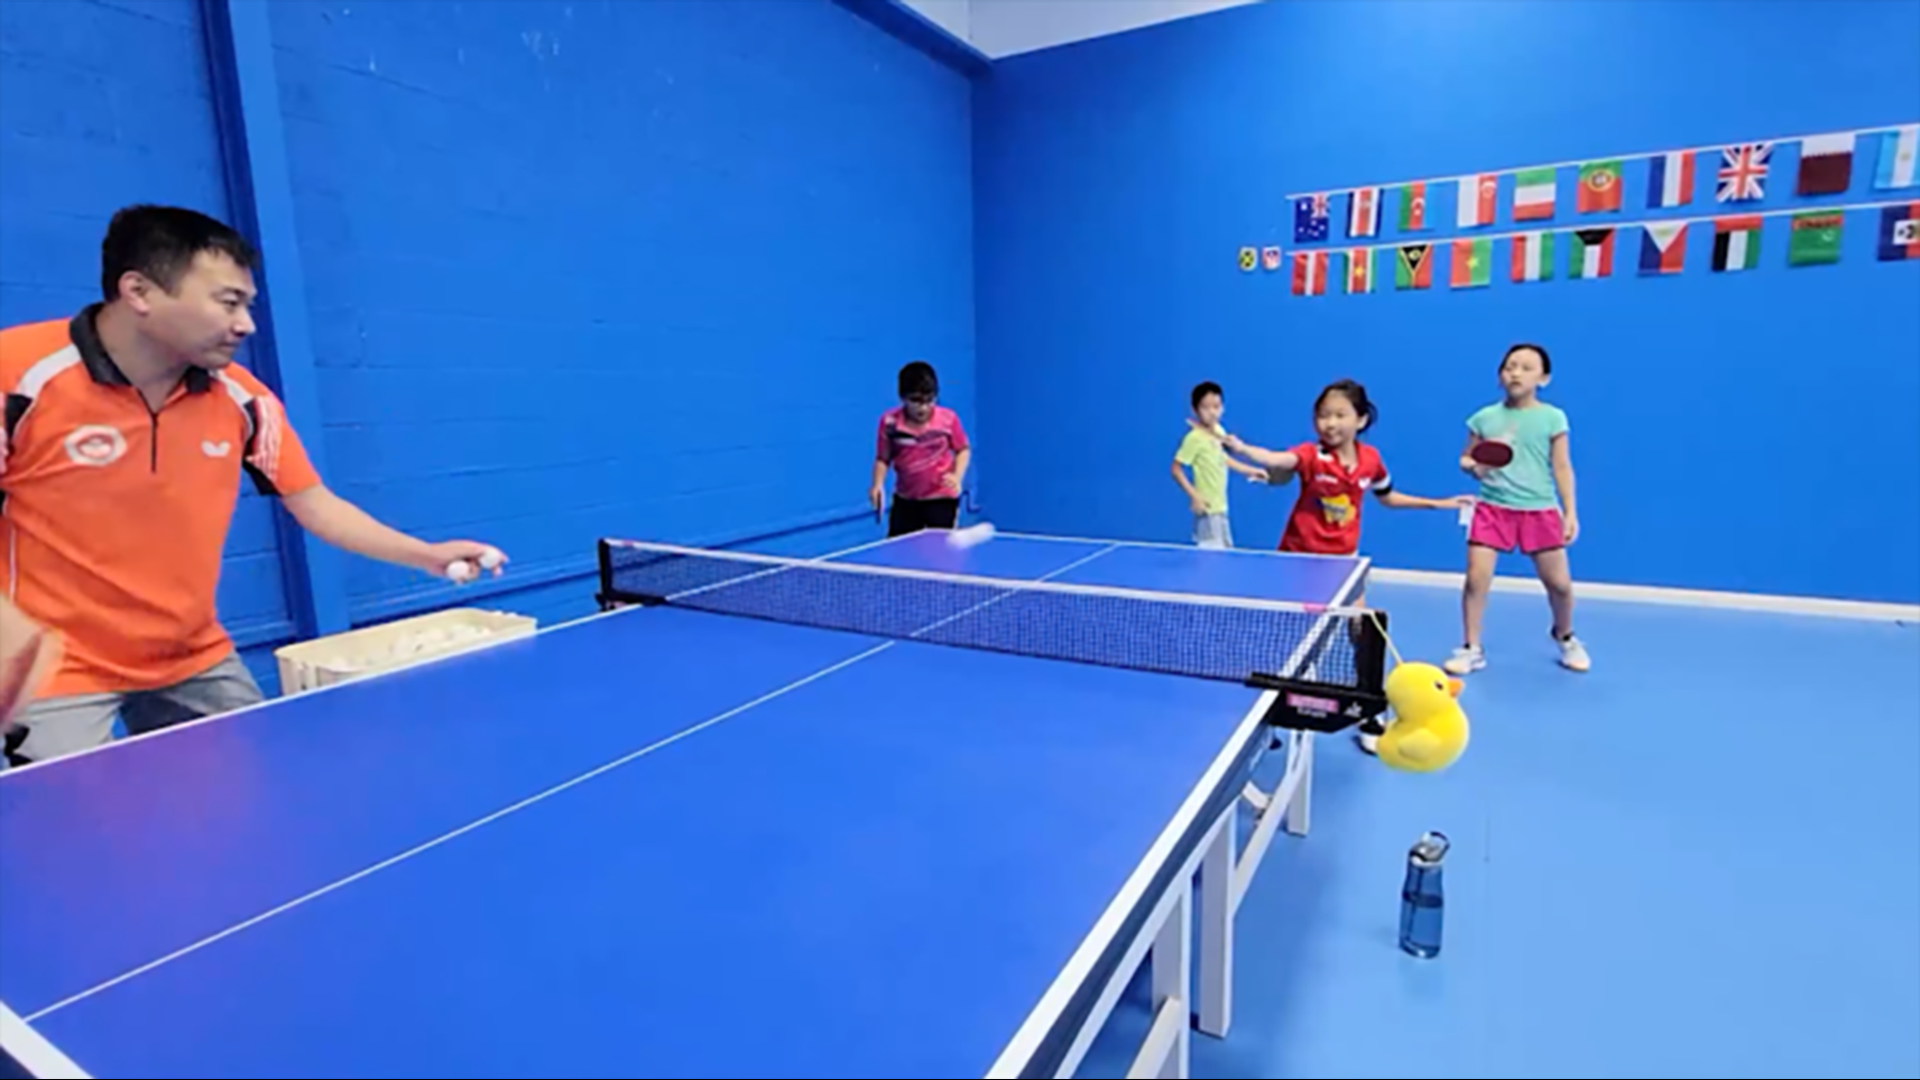 Table tennis live